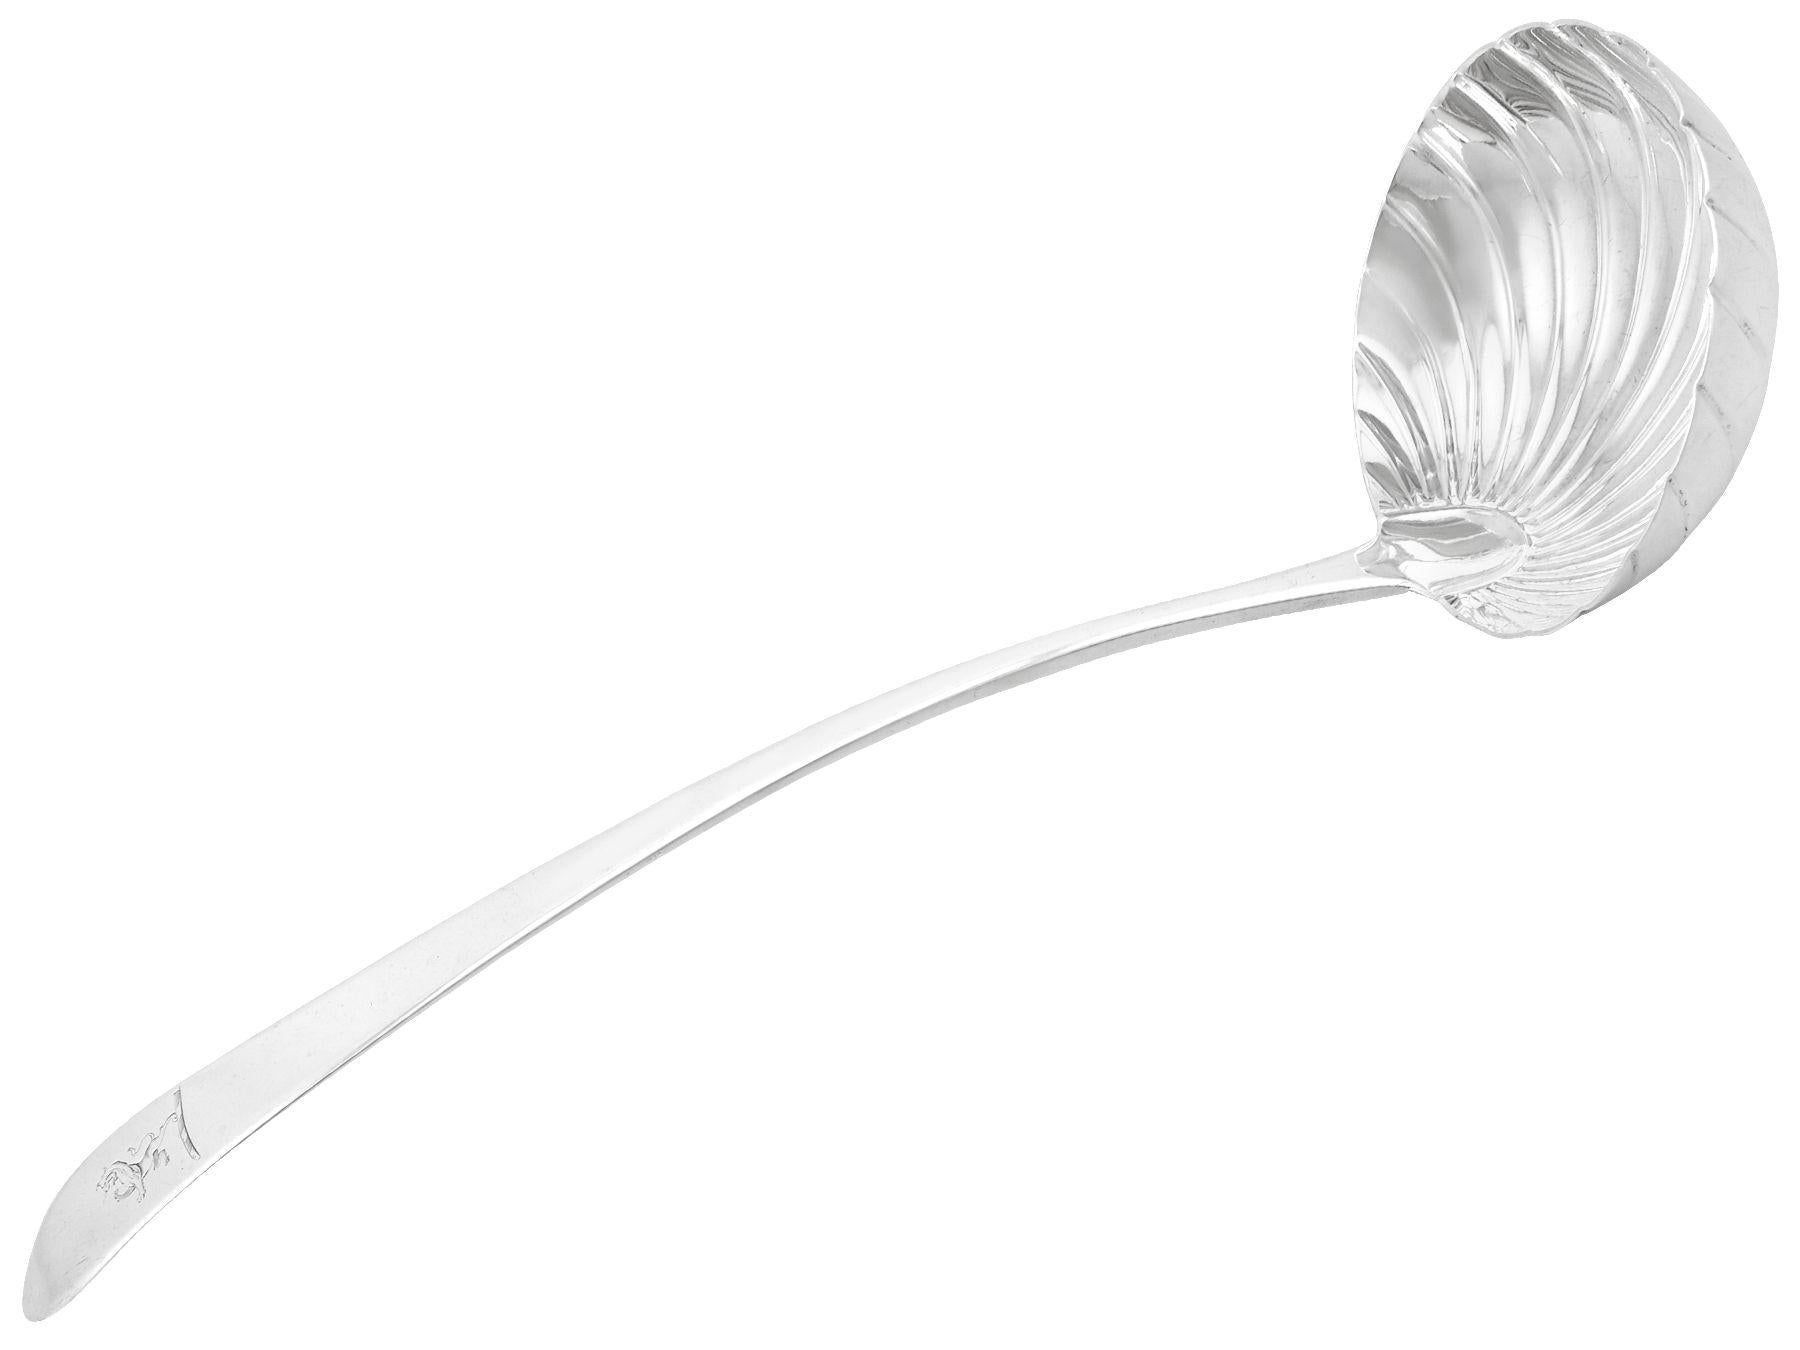 An exceptional, fine and impressive antique George III Irish sterling silver soup ladle; an addition to our silver cutlery collection

This exceptional George III Irish sterling silver ladle has a shell shaped bowl.

The anterior surface of the